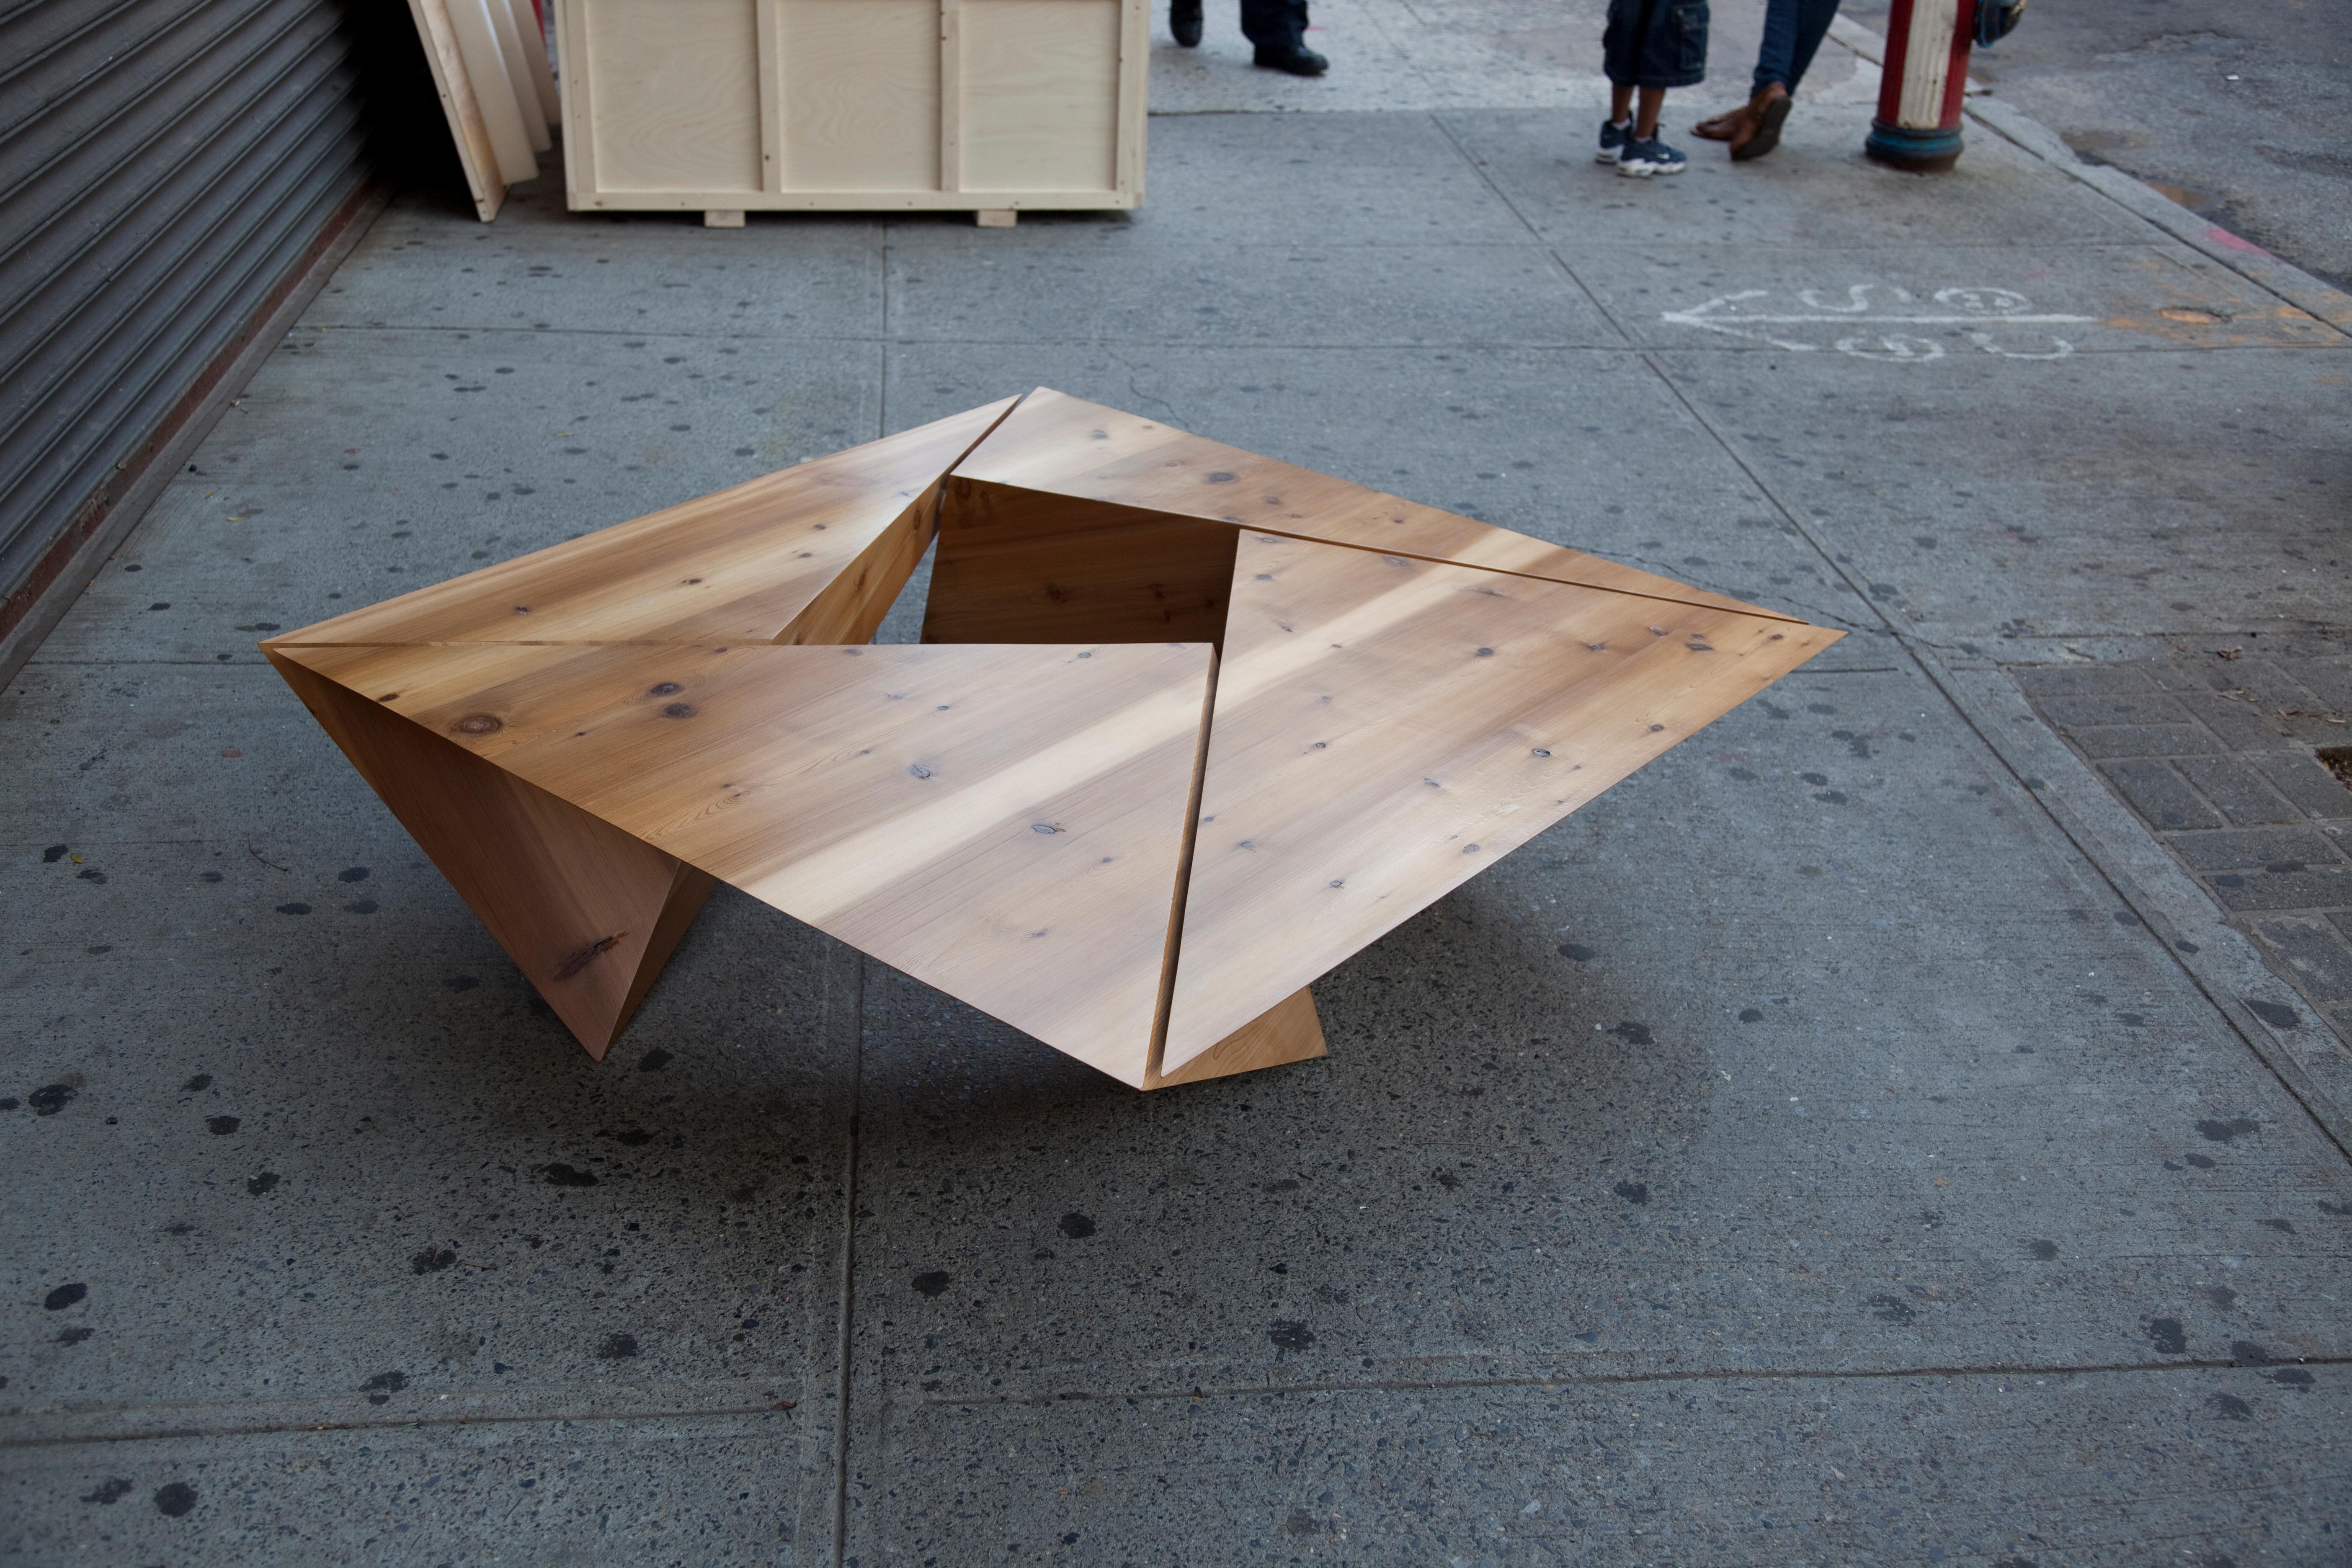 “Triangulated” is a coffee table made from four irregular tetrahedrons that lean on each other to create a perfect square in plan view. Held together with wooden hardware, it combines traditional Japanese joinery with its modern design.

Available